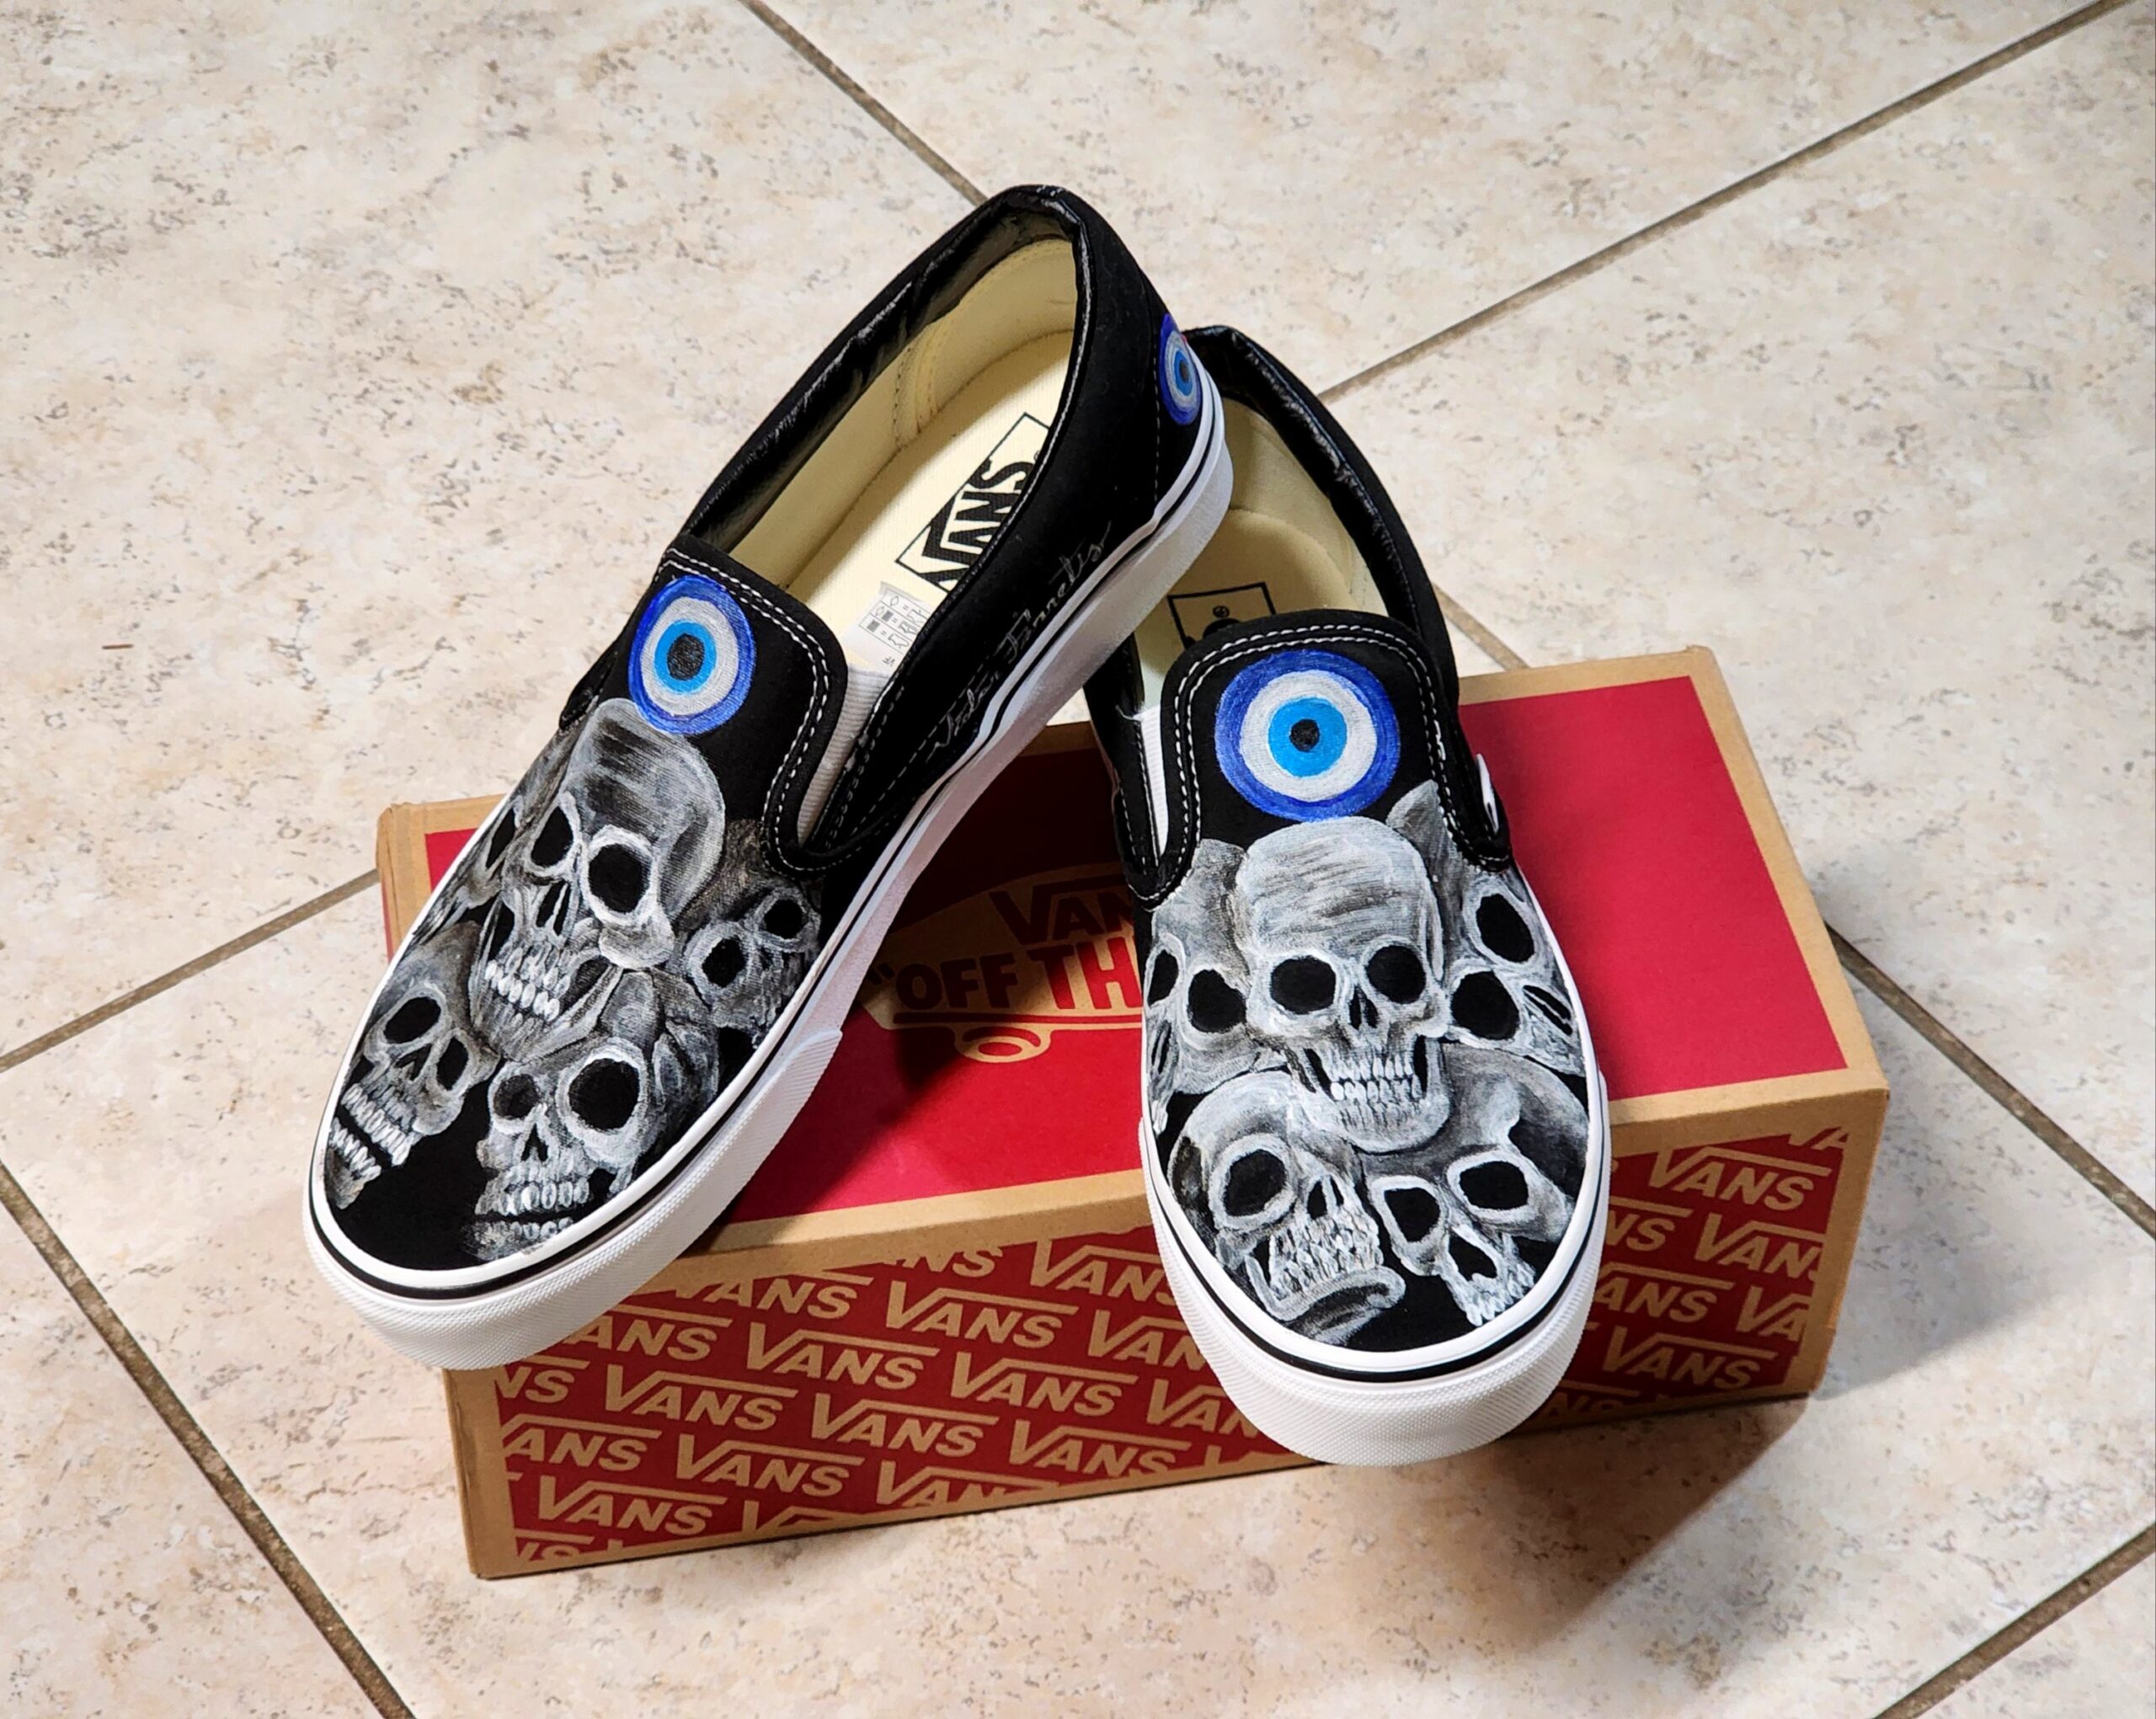 Brand New Vans | Handpainted Design of Skulls and evil eye. The artist signed these vans. Textile paint. Washer and dryer safe. Size: 10.5 US men | 12 US women